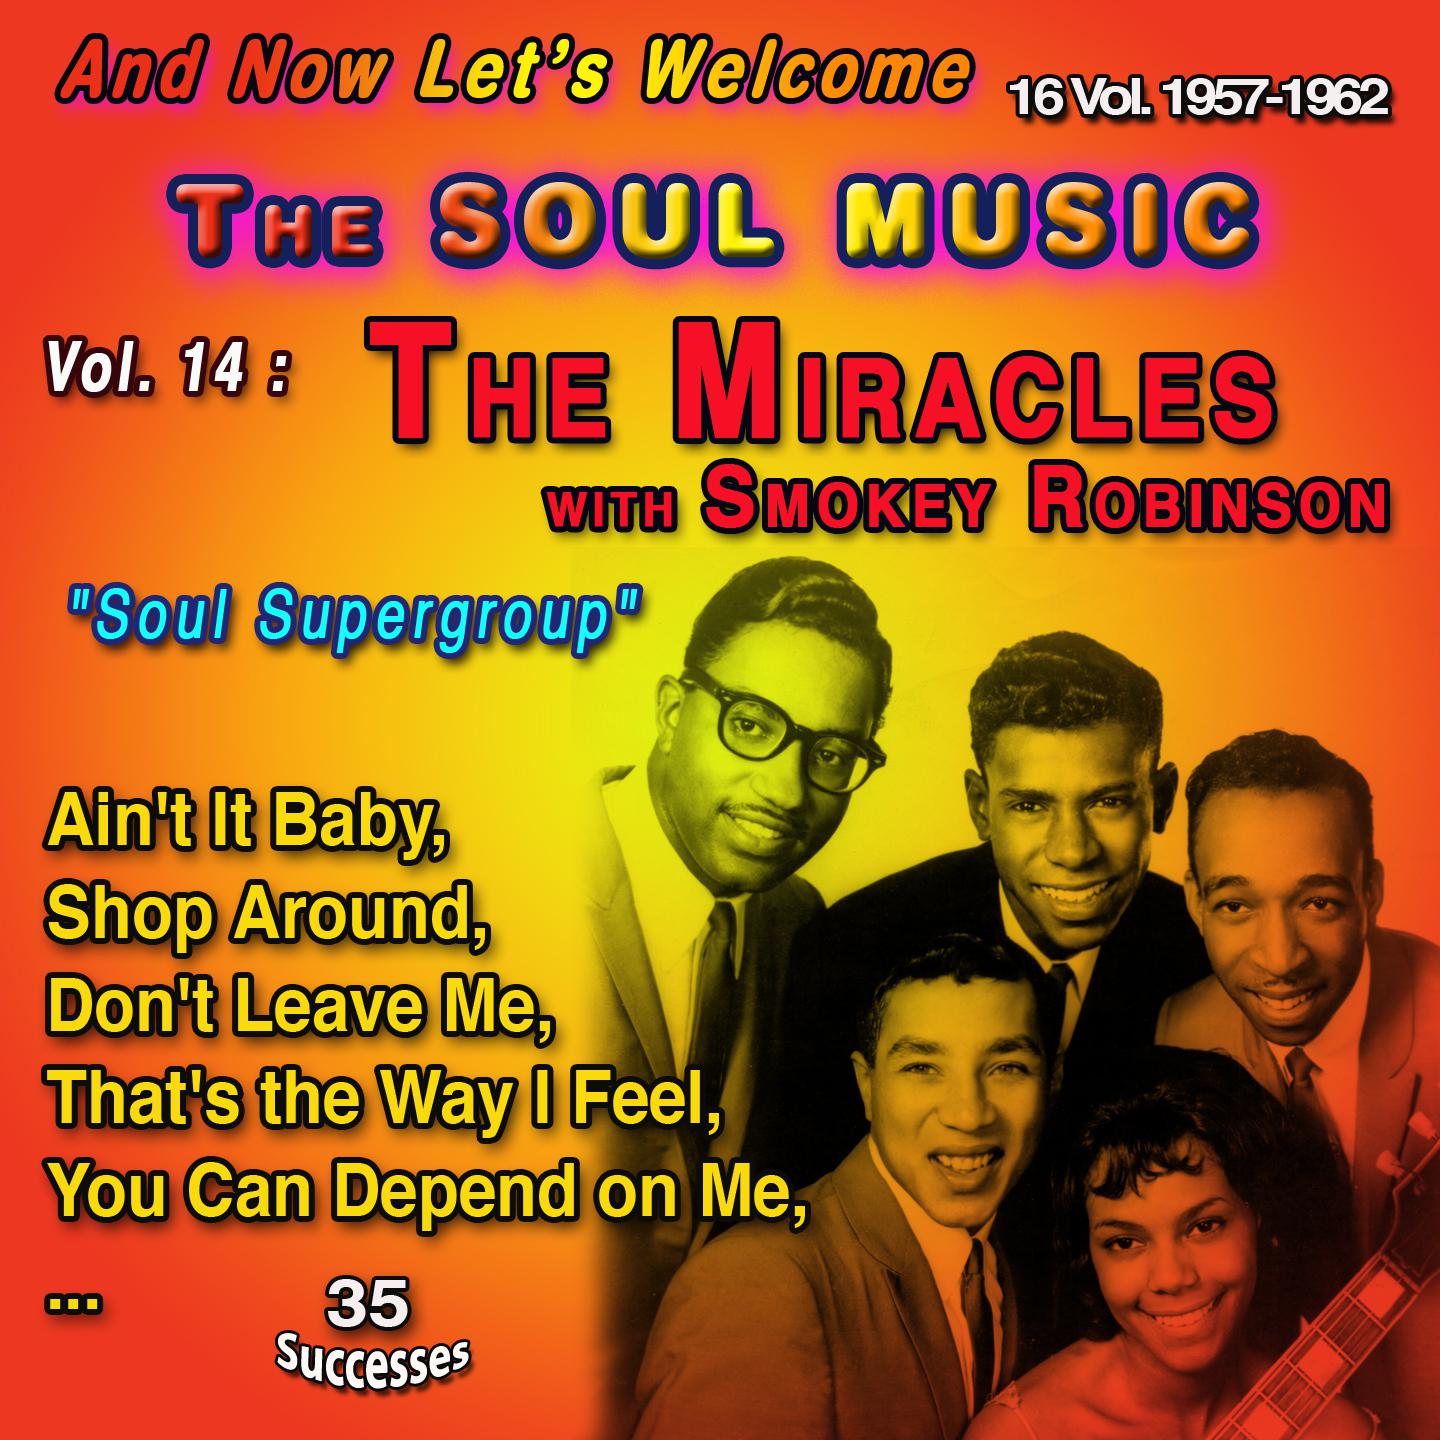 Постер альбома And Now Let's Welcome The Soul Music 16 Vol. 1957-1962 Vol. 14 : The Miracles with Smokey Robinson "Soul Supergroup"